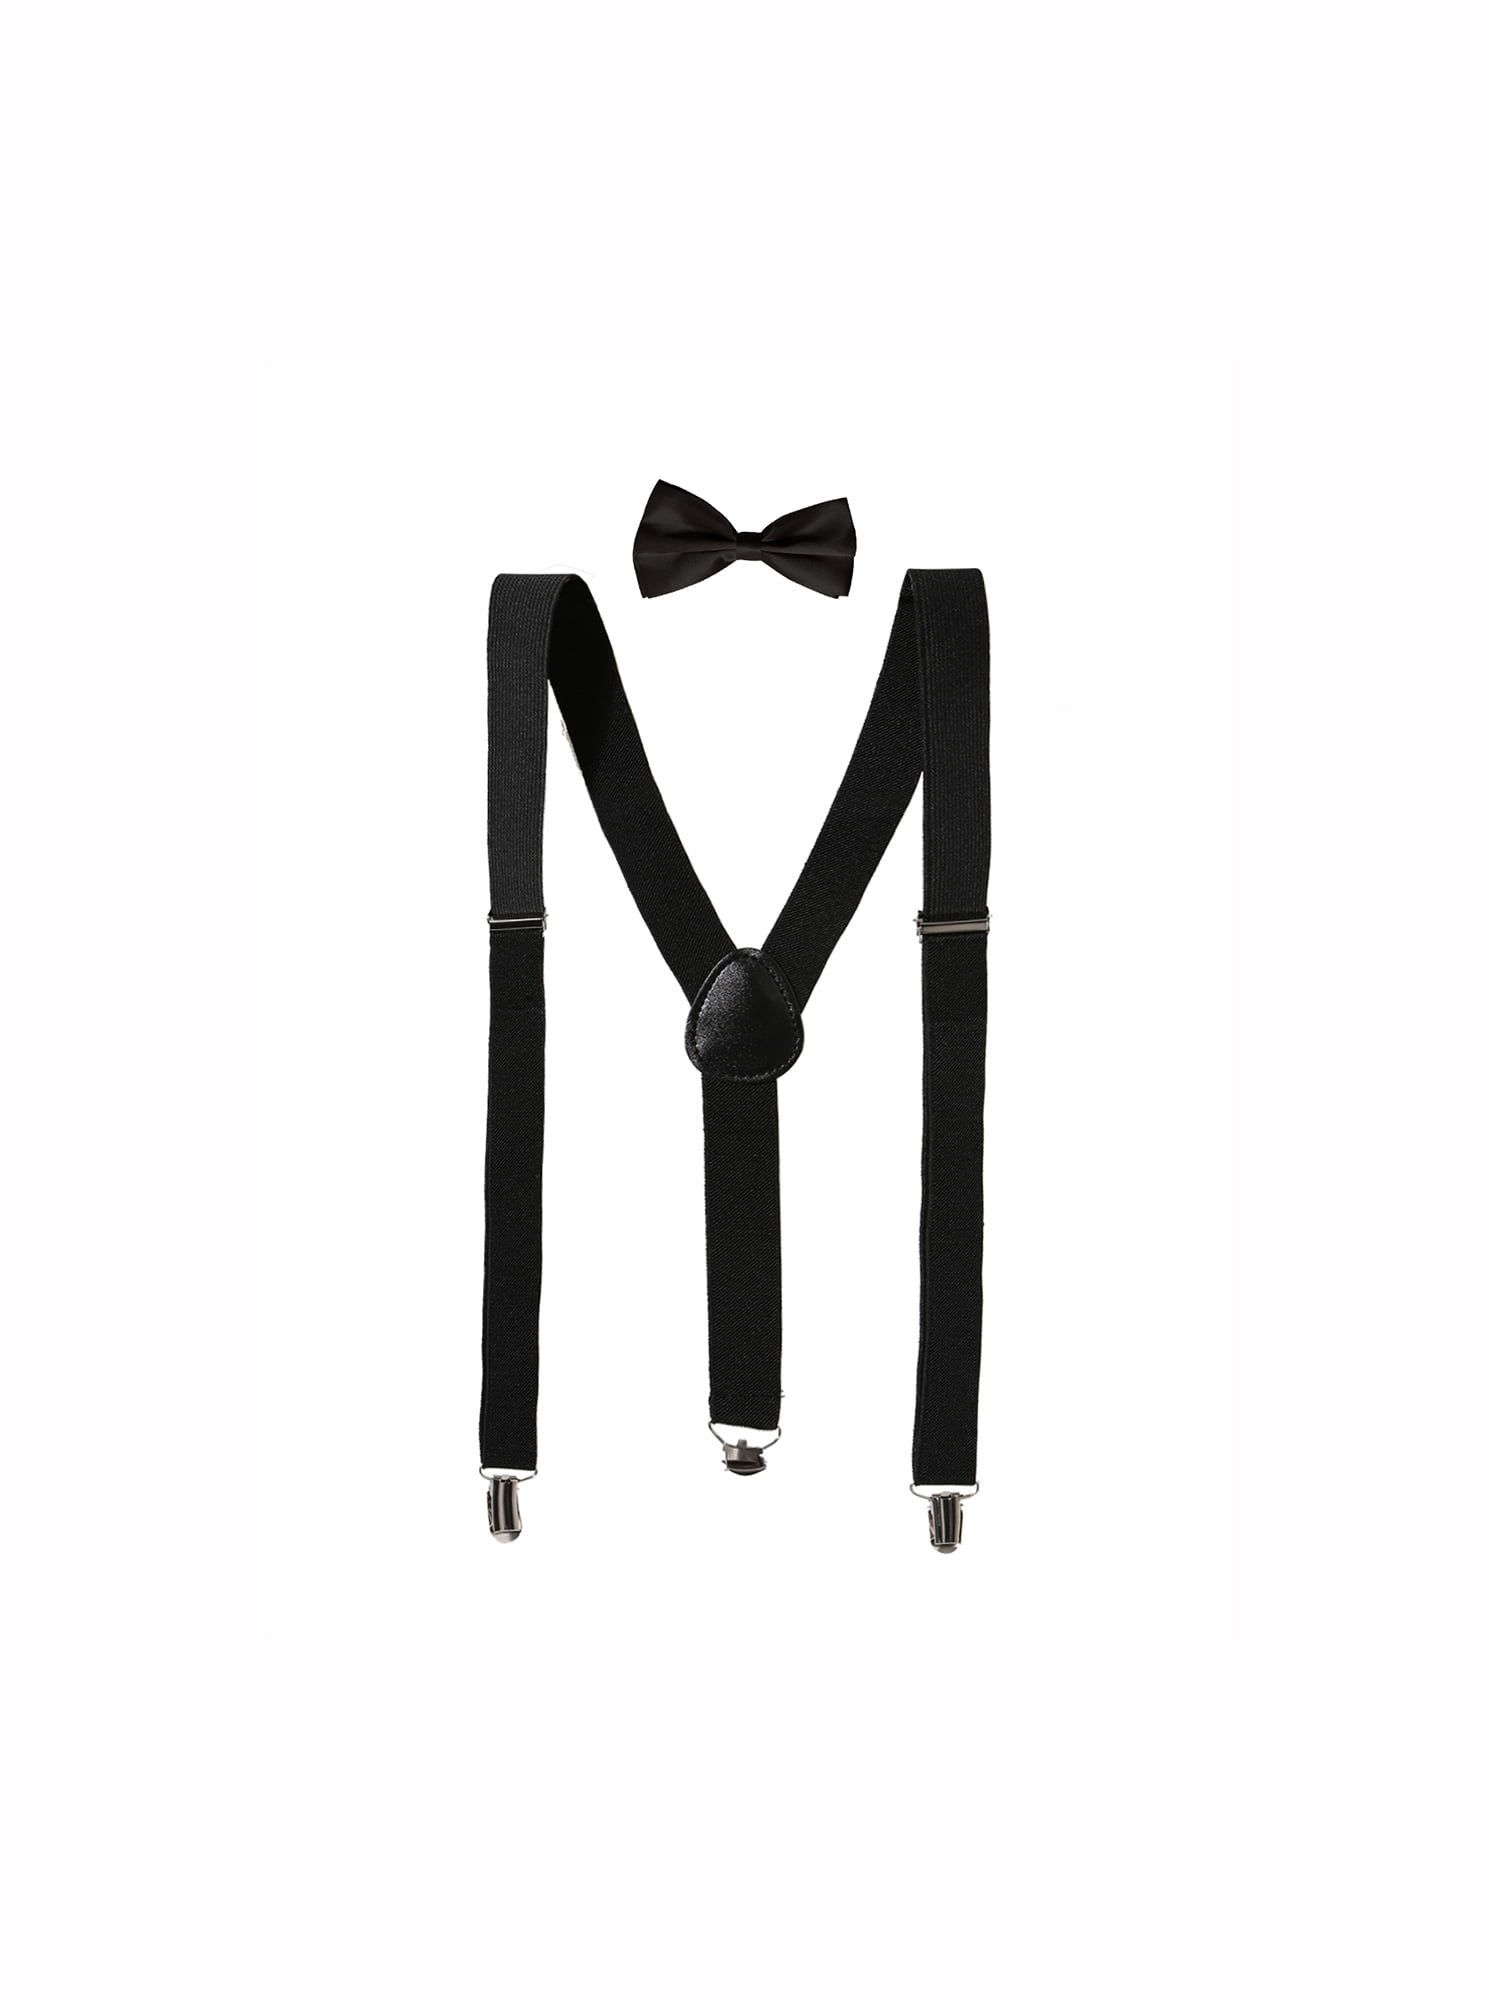 Suspenders Bow Tie for Men and Women Adjustable Tall stature Elastic Y Back Style With Strong Metal Clips 